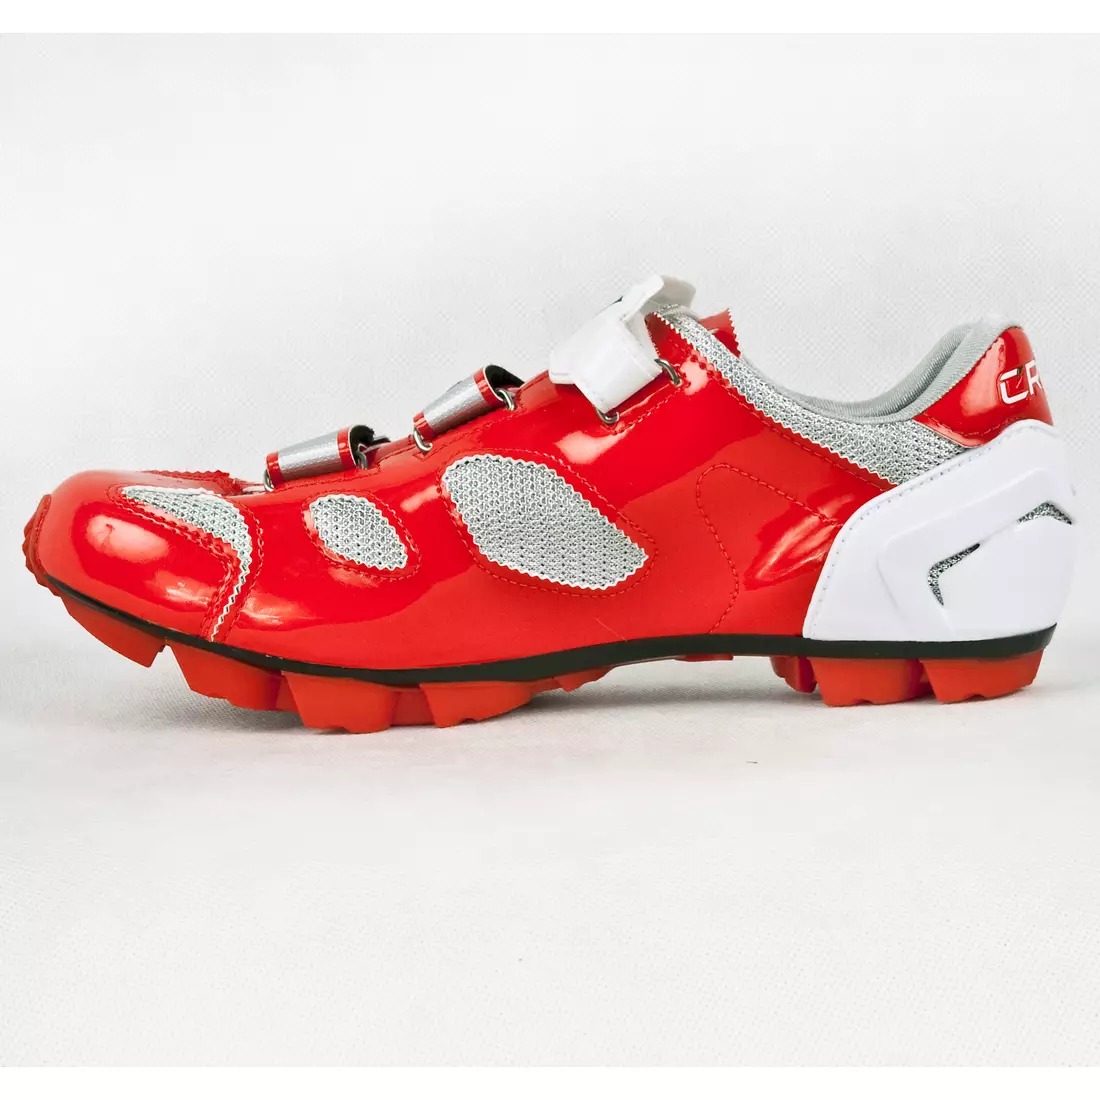 CRONO TRACK - MTB cycling shoes - color: Red